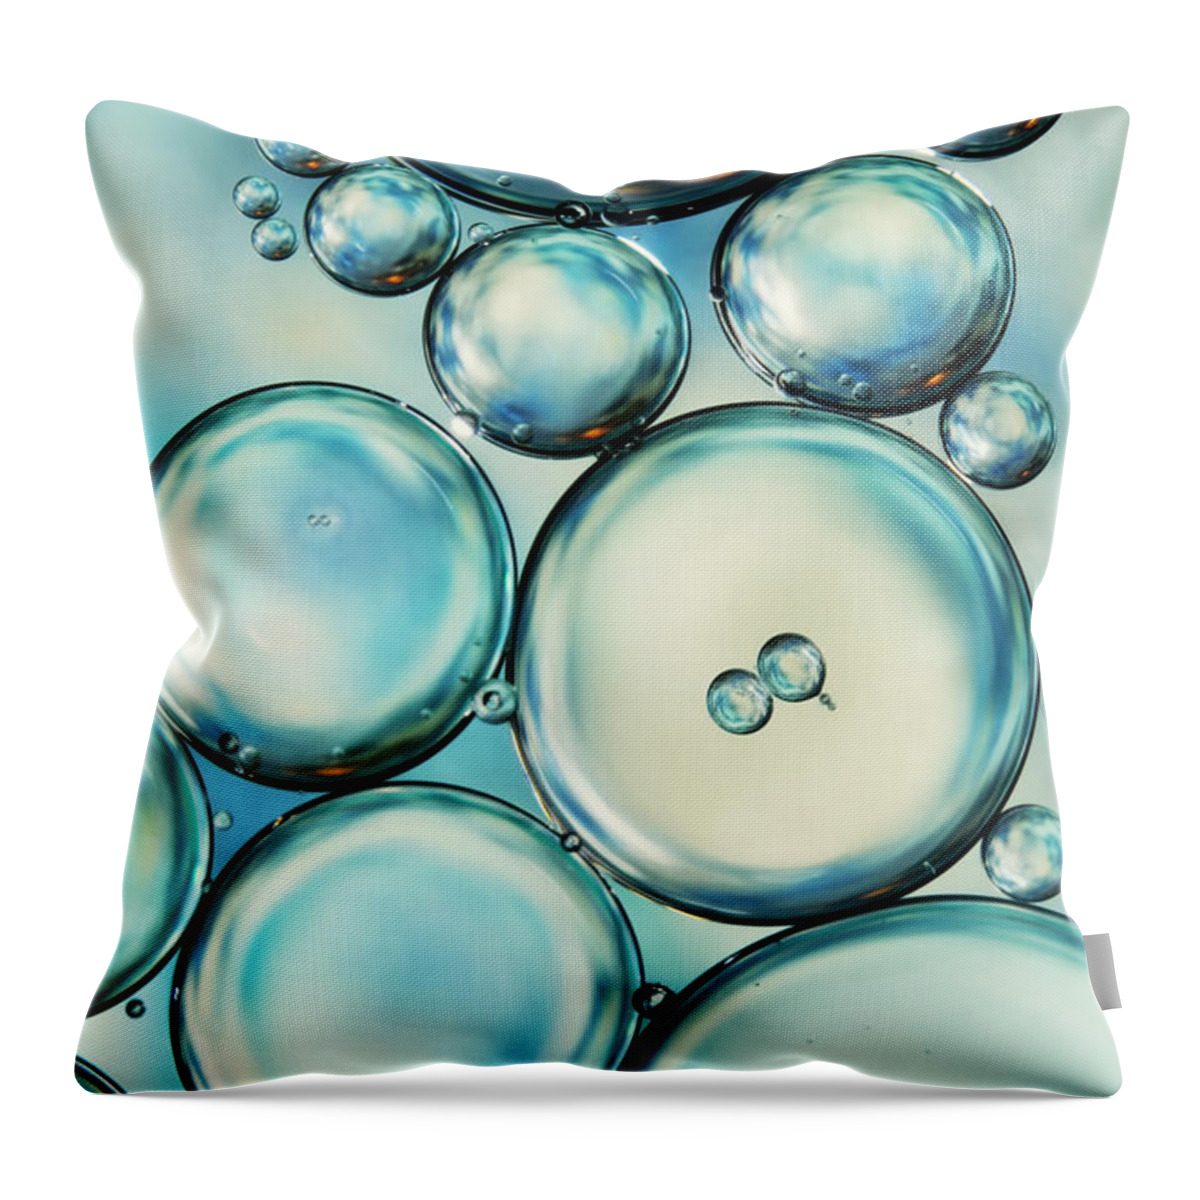 Oil Throw Pillow featuring the photograph Sky Blue Bubble Abstract by Sharon Johnstone